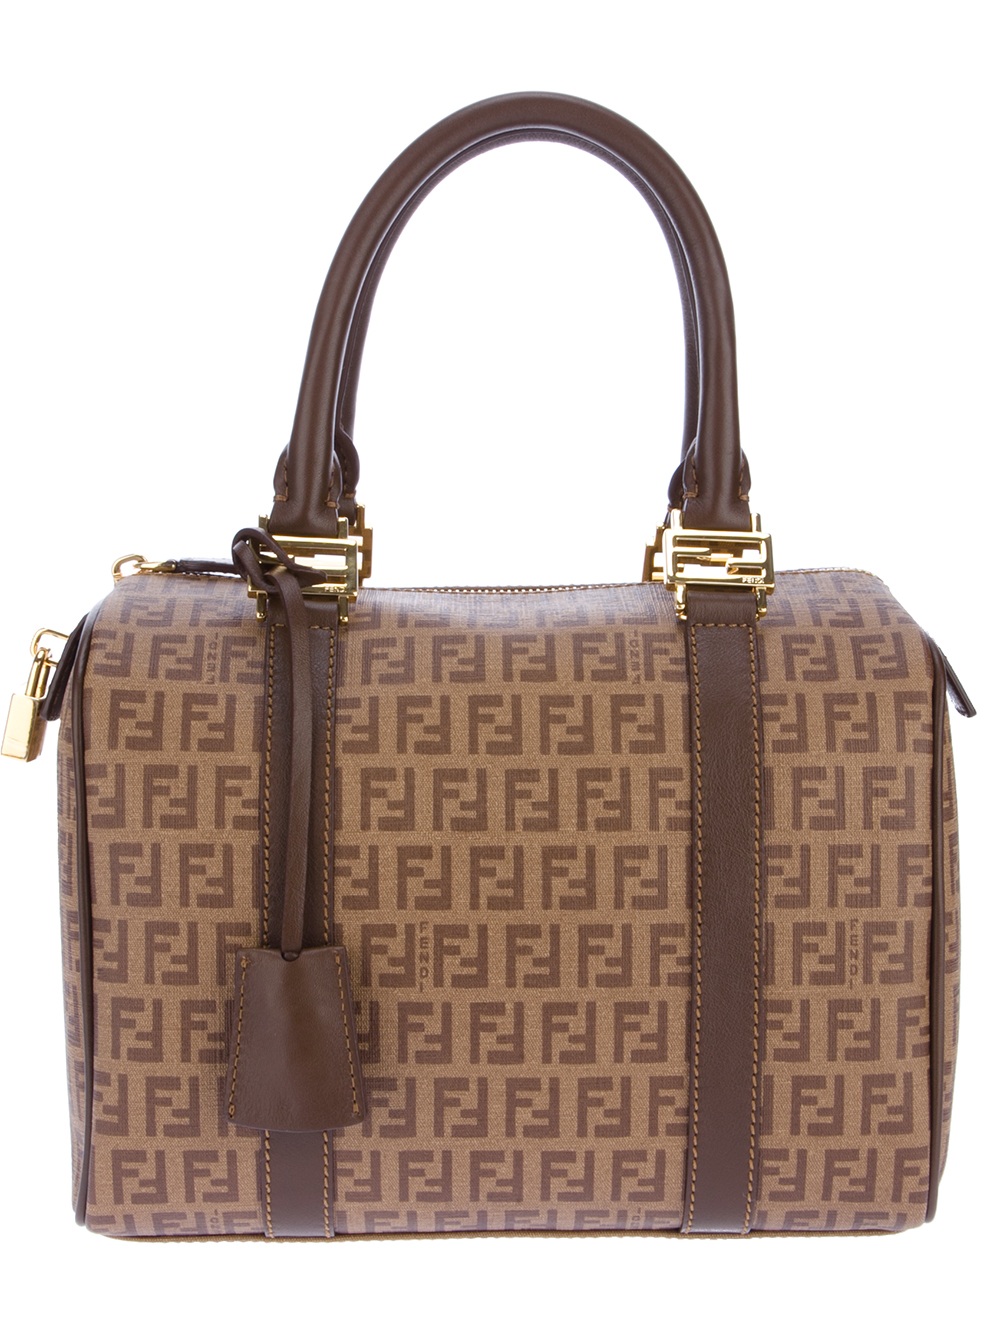 Lyst - Fendi Bauletto Forever Tote in Brown